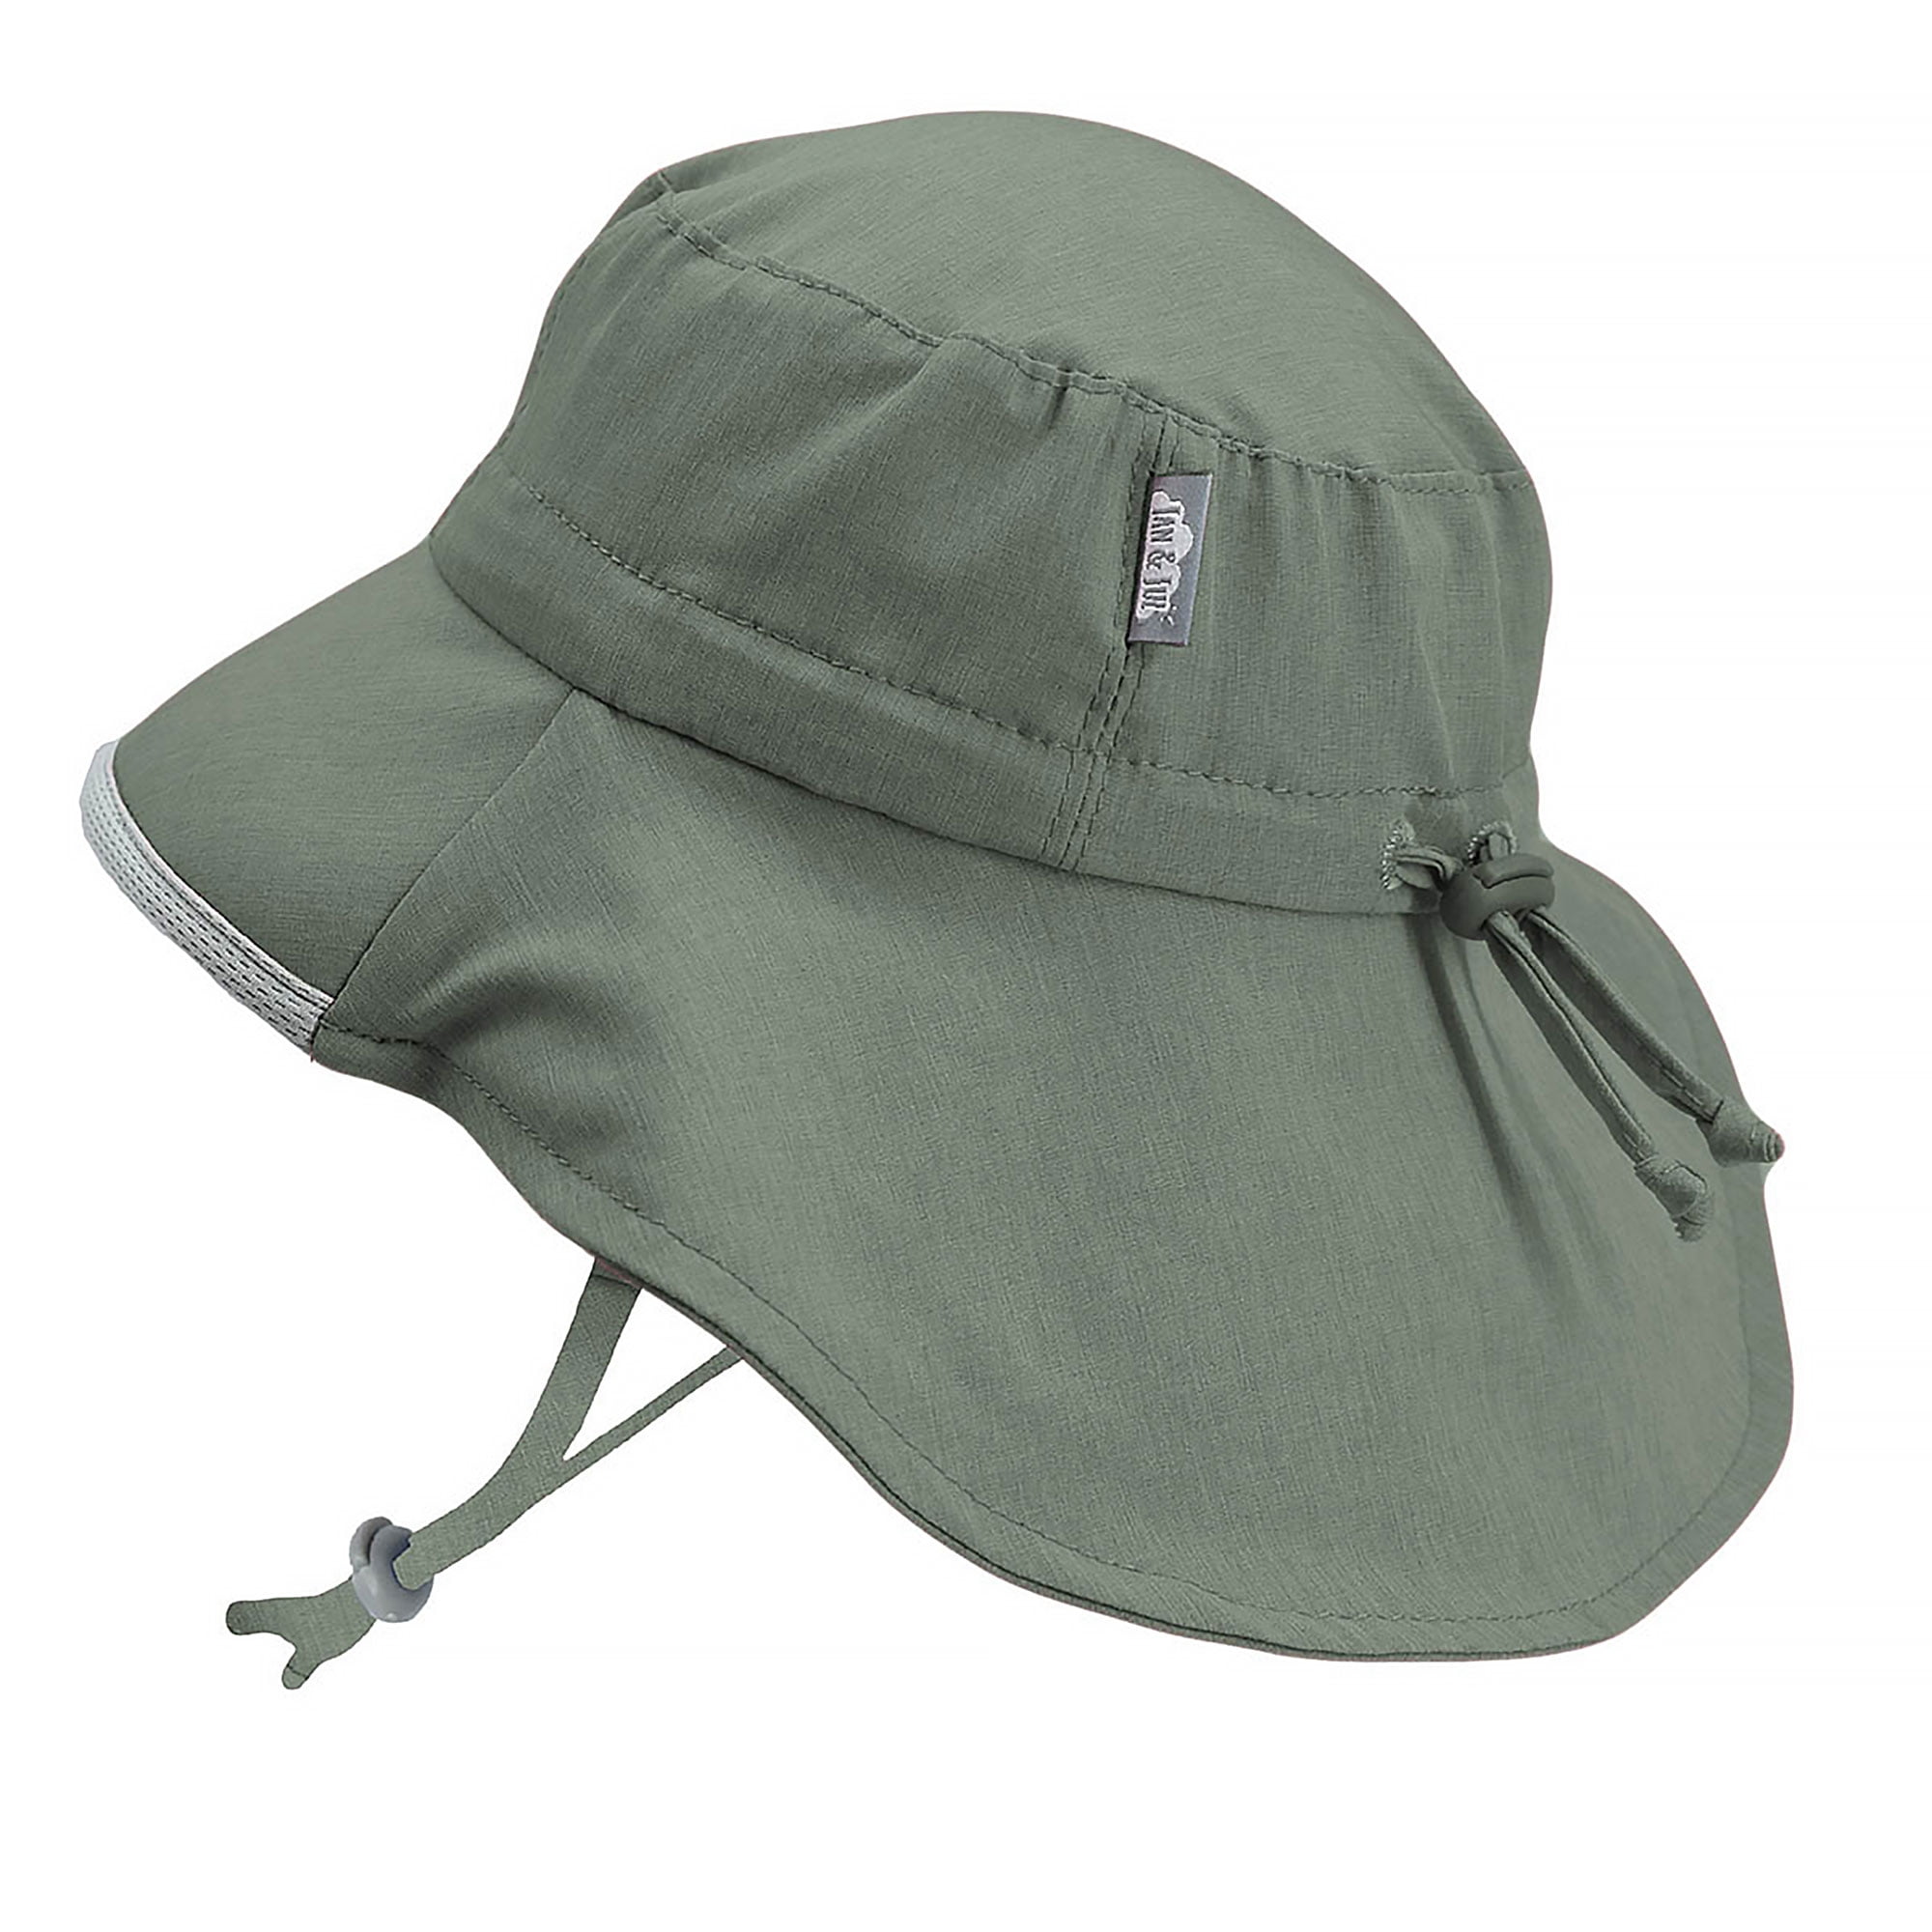 JAN & JUL Summer Hats for Toddler Boys with UPF 50 Sun Protection (L: 2-5  Years, Army Green) 